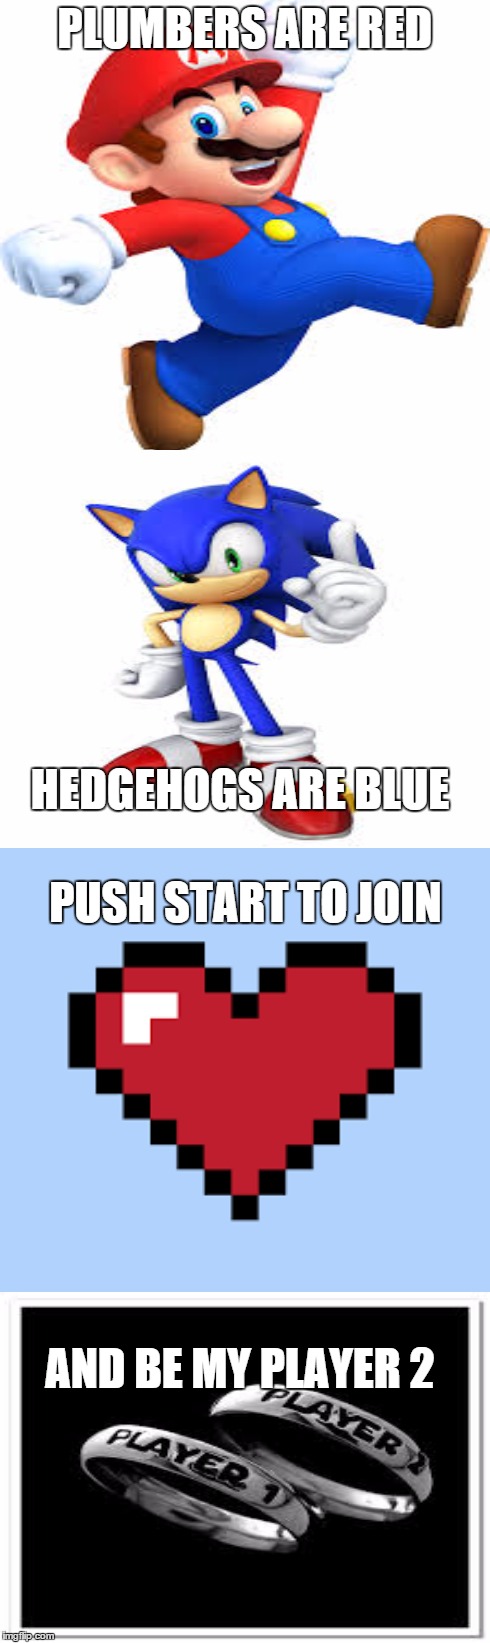 Gamer Poem :D | PLUMBERS ARE RED HEDGEHOGS ARE BLUE AND BE MY PLAYER 2 PUSH START TO JOIN | image tagged in memes,gamer,mario,sonic,minecraft,video games | made w/ Imgflip meme maker